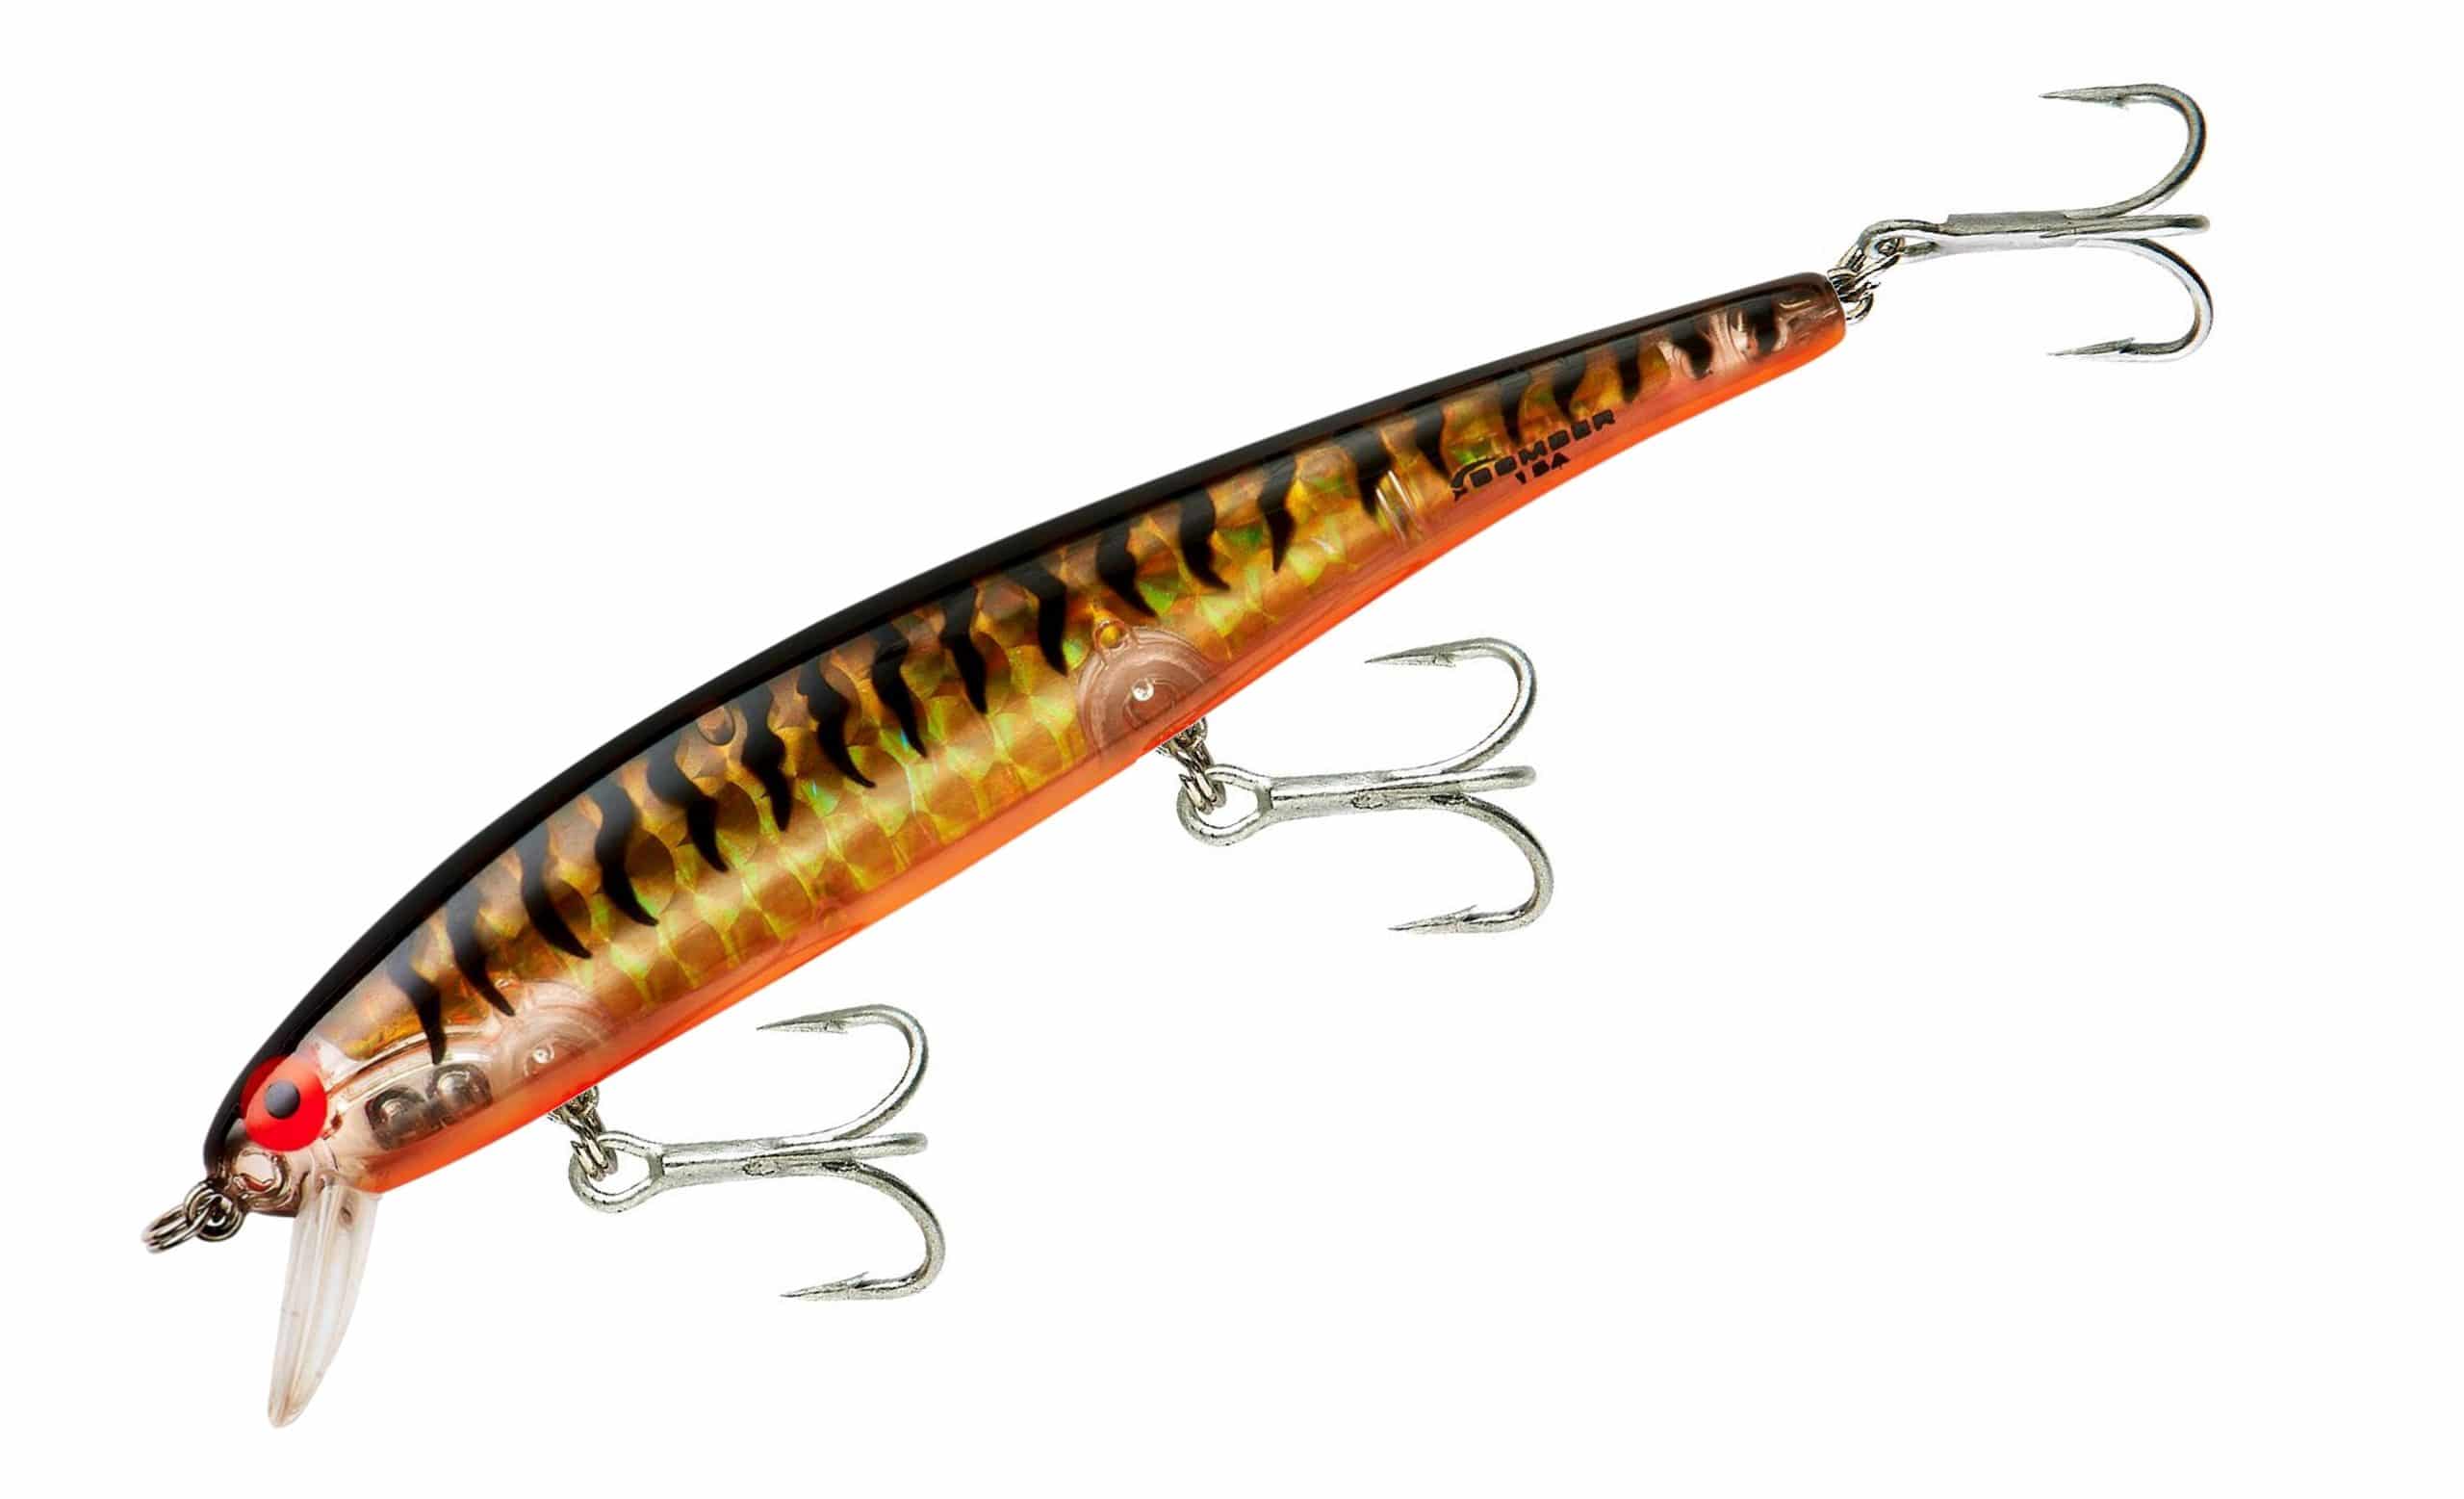 Bomber Long 15A Tripple Pack 7 (Gold) - Compleat Angler Ringwood